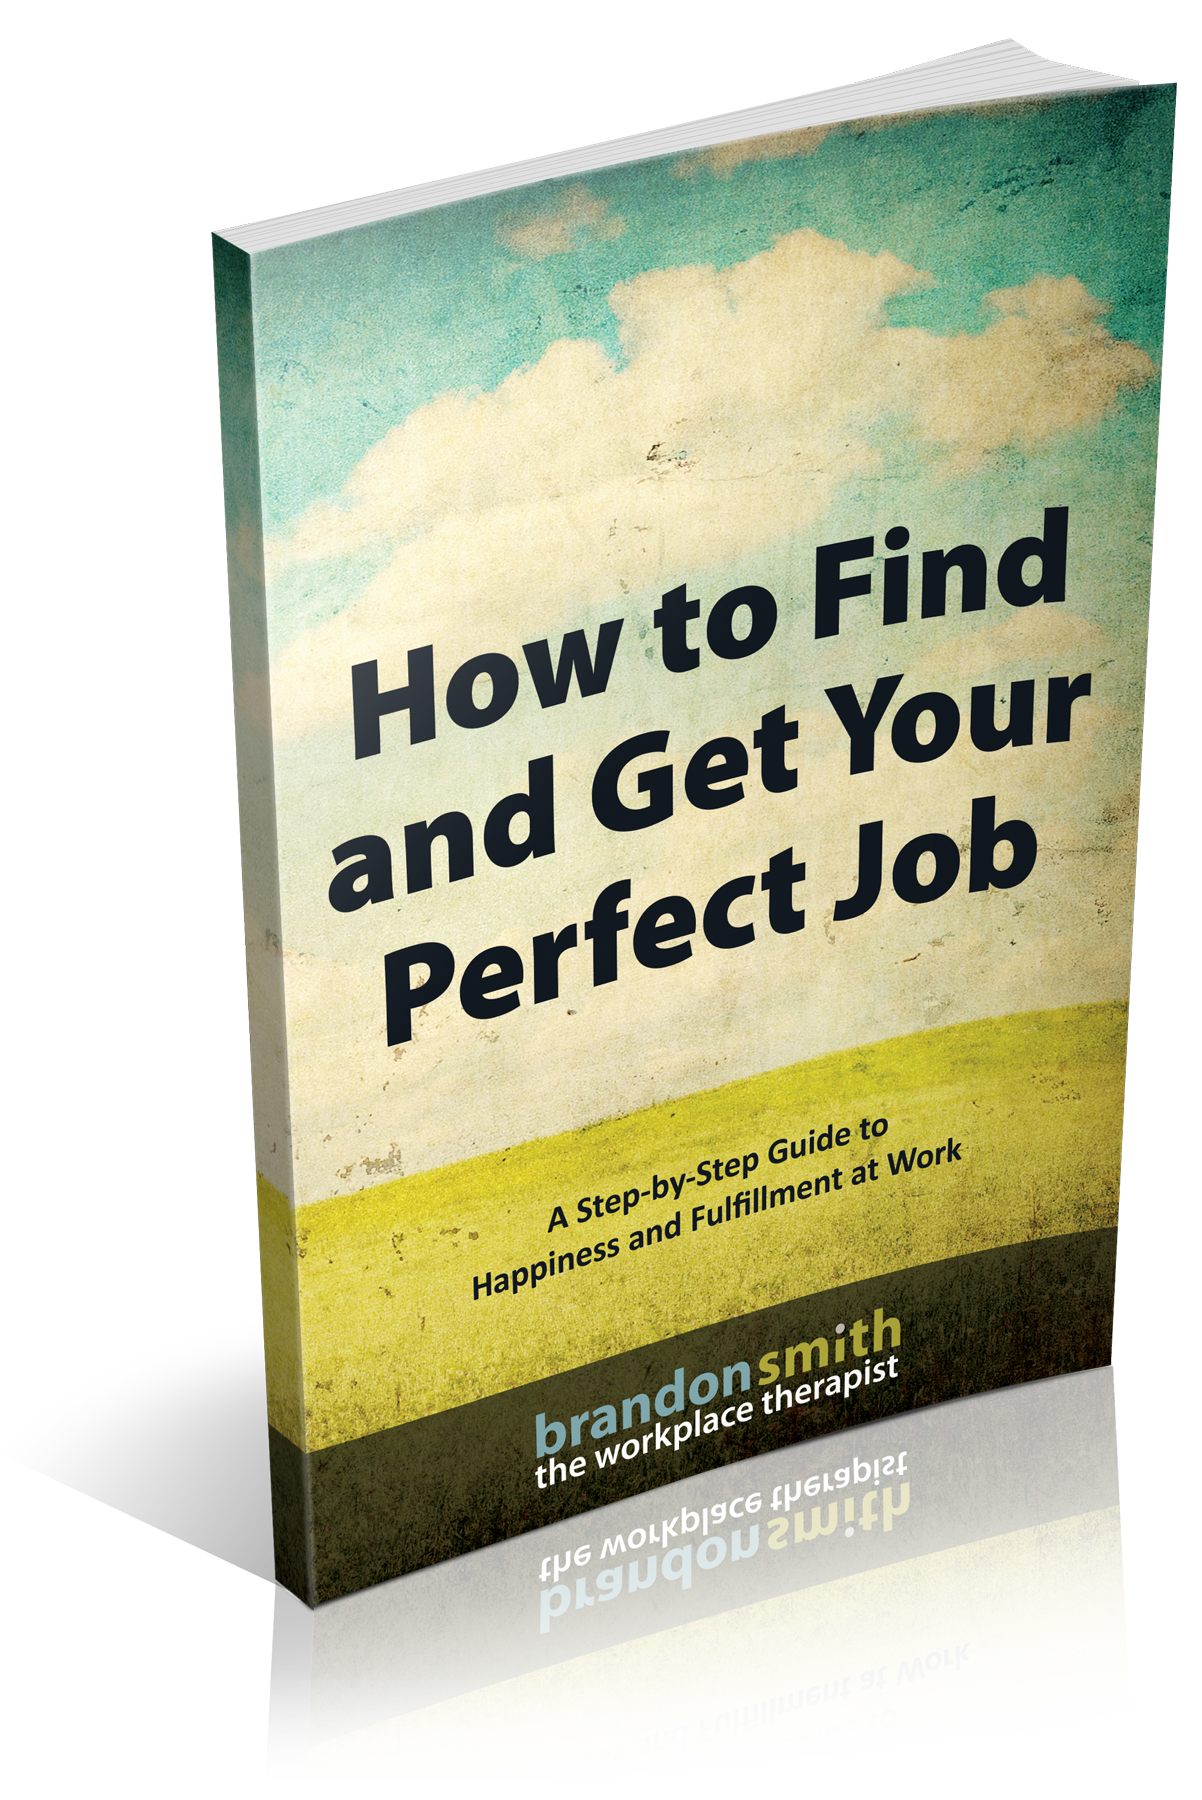 HOW TO FIND AND GET YOUR PERFECT JOB